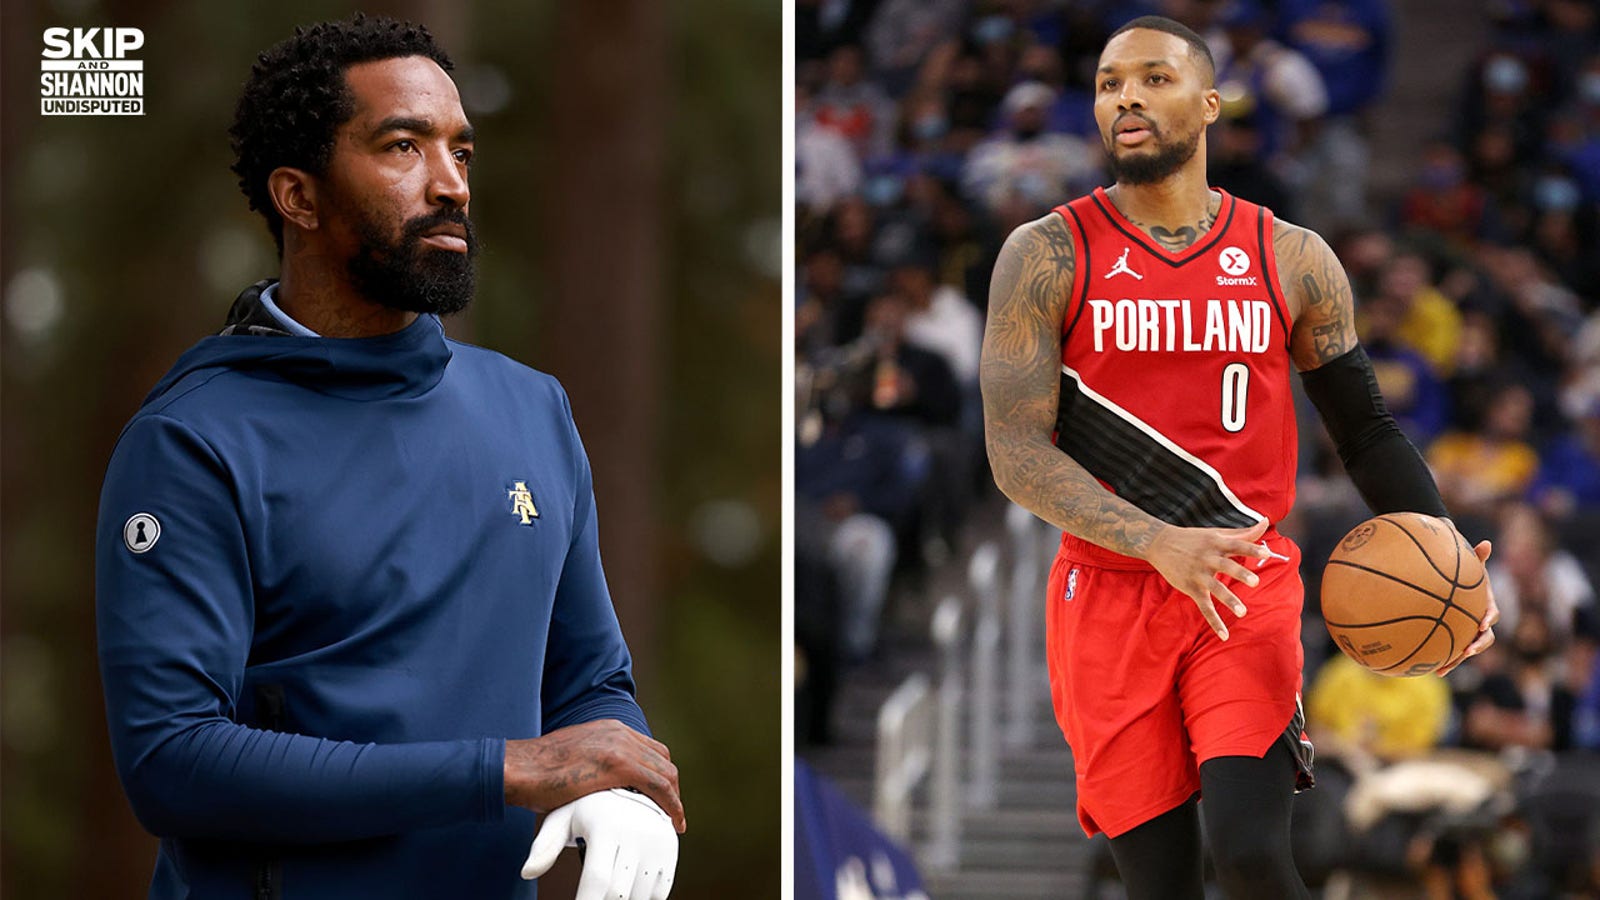 J.R. Smith asks Damian Lillard on why he would 'rot' in Portland